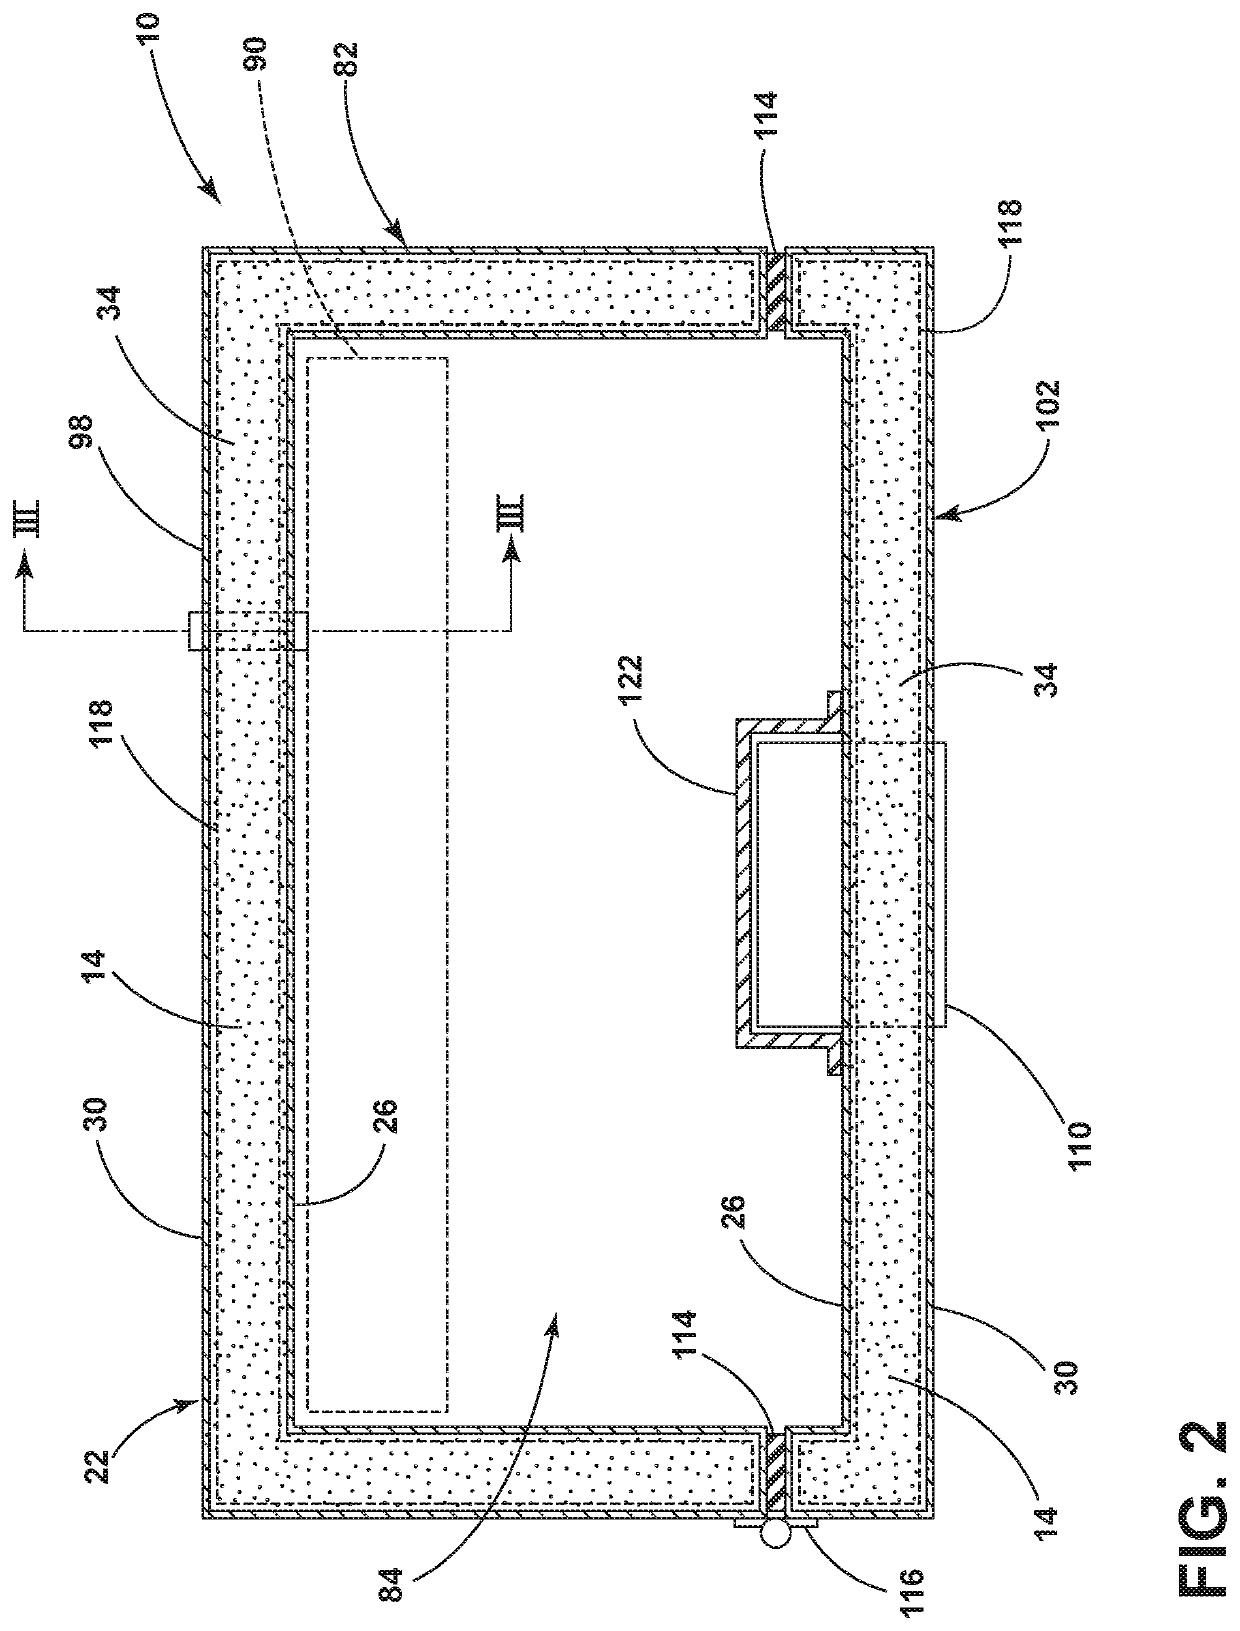 Method for ensuring reliable core material fill around the pass throughs in a vacuum insulated structure